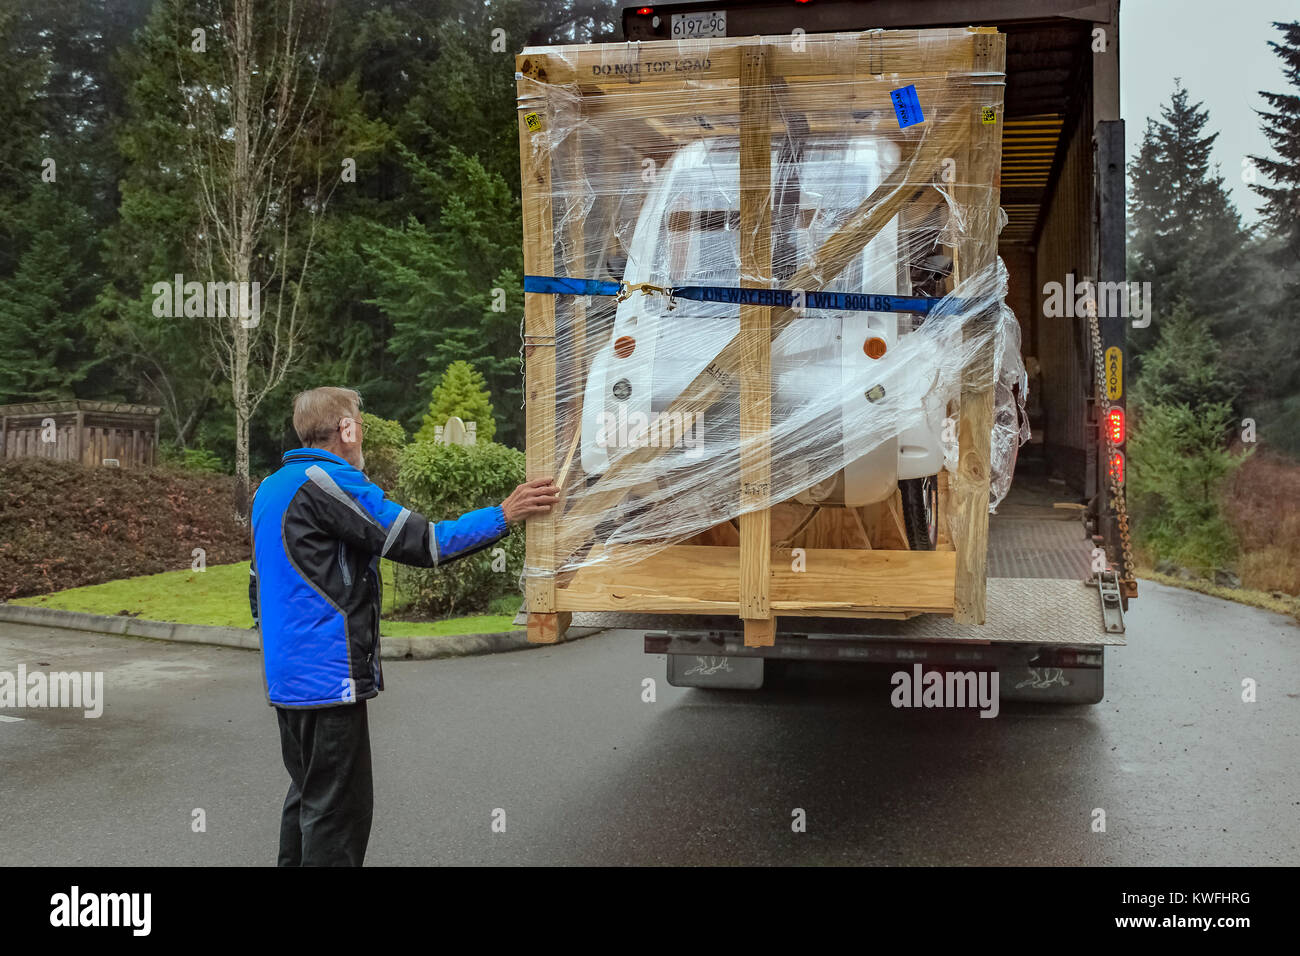 An elderly man in a blue coat touches a large shipping crate containing a new electric ELF tricycle as he waits for a transport truck to unload it. Stock Photo